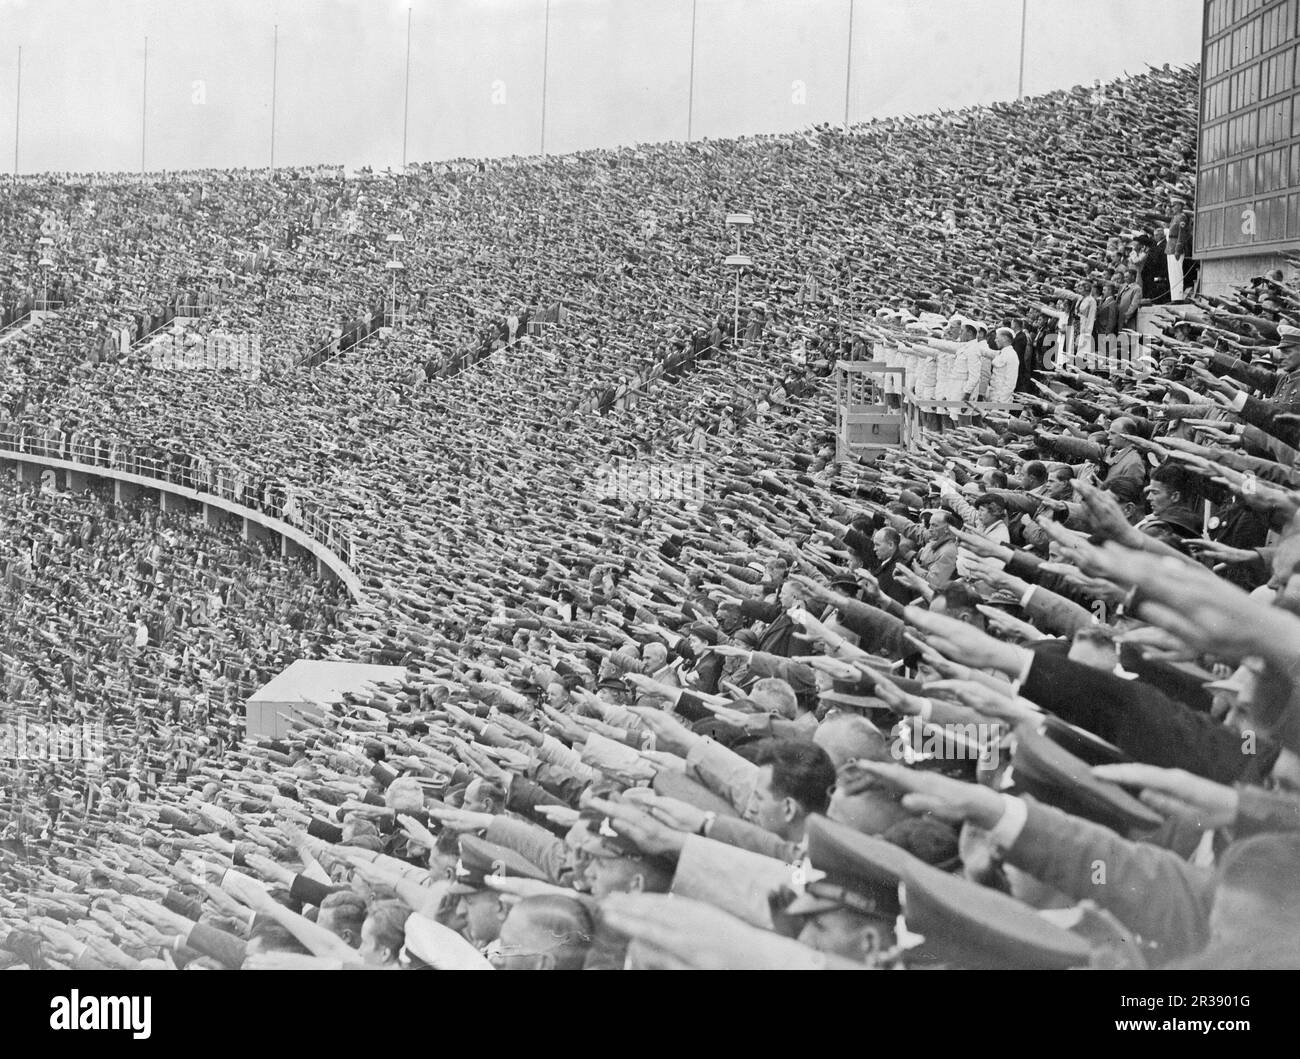 Berlin Olympics 1936. The 1936 Summer Olympics (German: Olympische Sommerspiele 1936), officially known as the Games of the XI Olympiad (German: Spiele der XI. Olympiade) and commonly known as Berlin 1936, were an international multi-sport event held from 1 to 16 August 1936 in Berlin, Germany.  Pictured Olympiastadion in Berlin a stadium built for the 1936 summer olympics with room for 100 000 people and the grand opening of the olympic games 1 august 1936. People are seen doing the Nazi salut, also known as the Hitler salut, a gesture that was at the time used as a greeting in Nazi Germany. Stock Photo